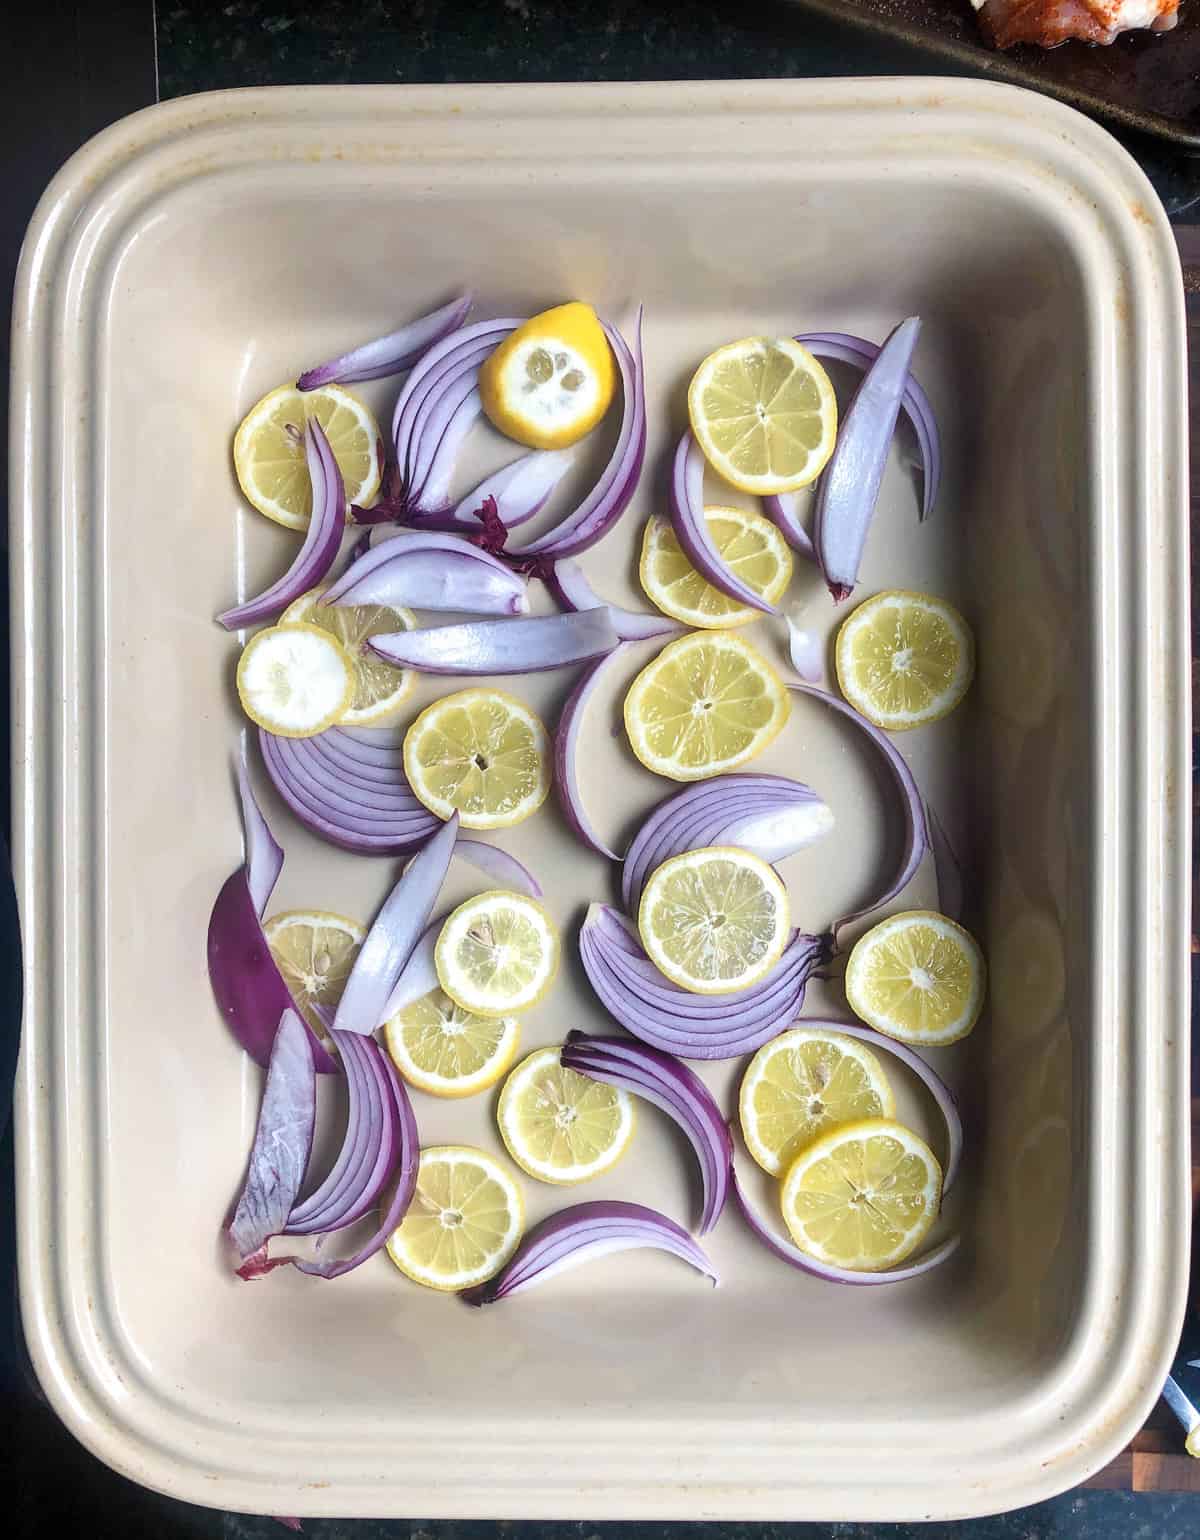 take a large pan and add sliced lemons and red onion to the bottom in a single layer.